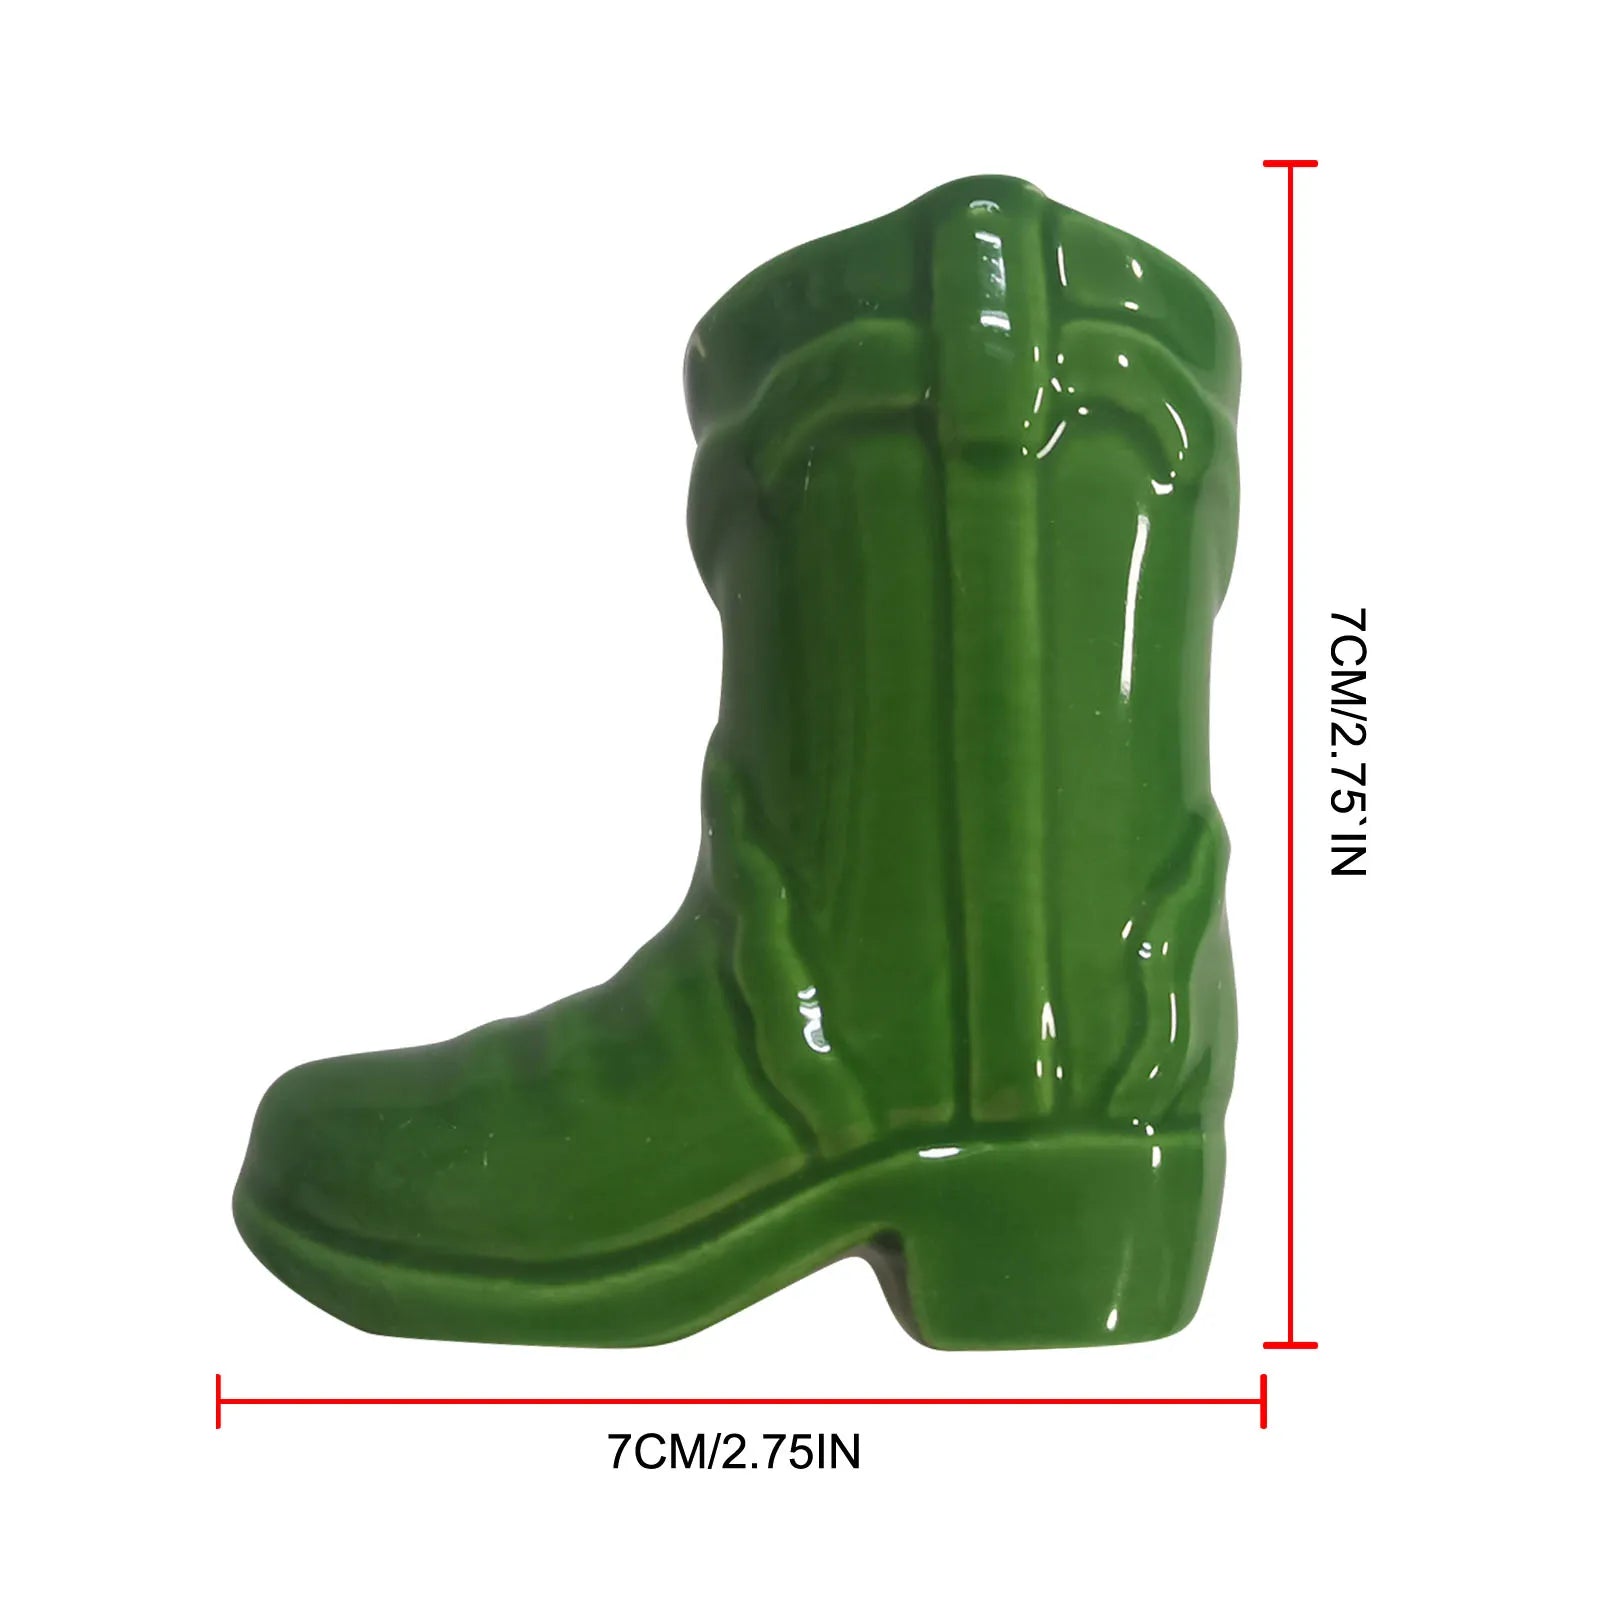 Ceramic Cowboy Boot Match Stick Holder With Striker - The House Of BLOC